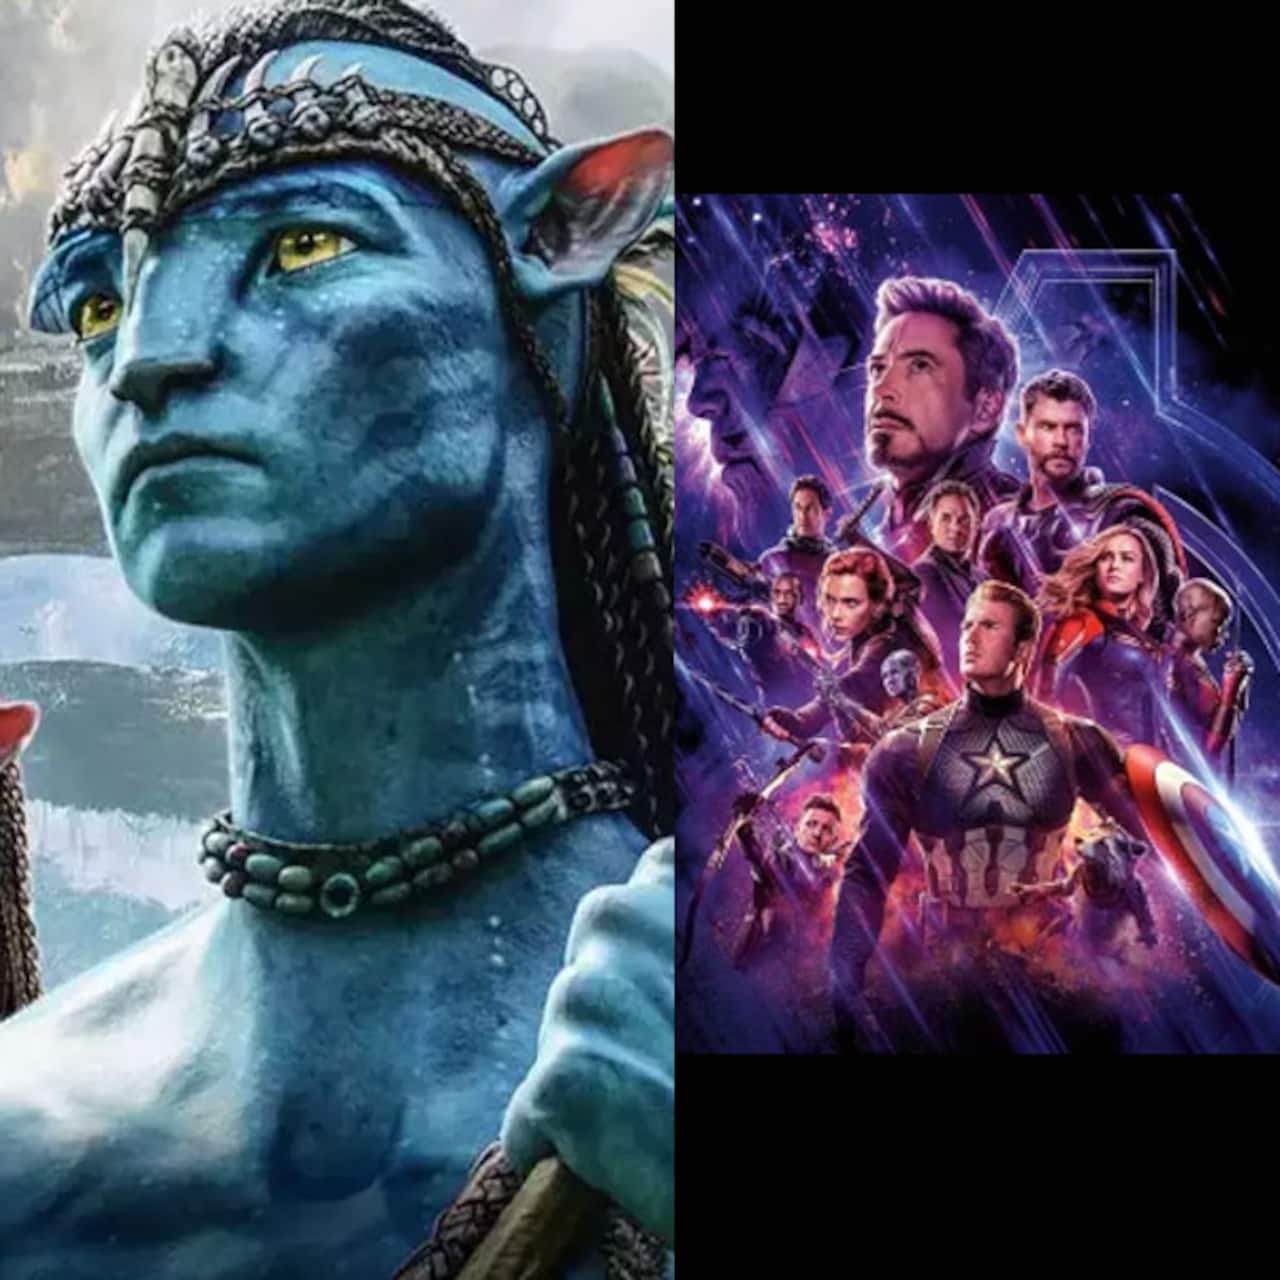 Avatar The Way of Water Day 1 box office collection: James Cameron's film mints Rs 40 crores in India; fails to beat Avengers Endgame record